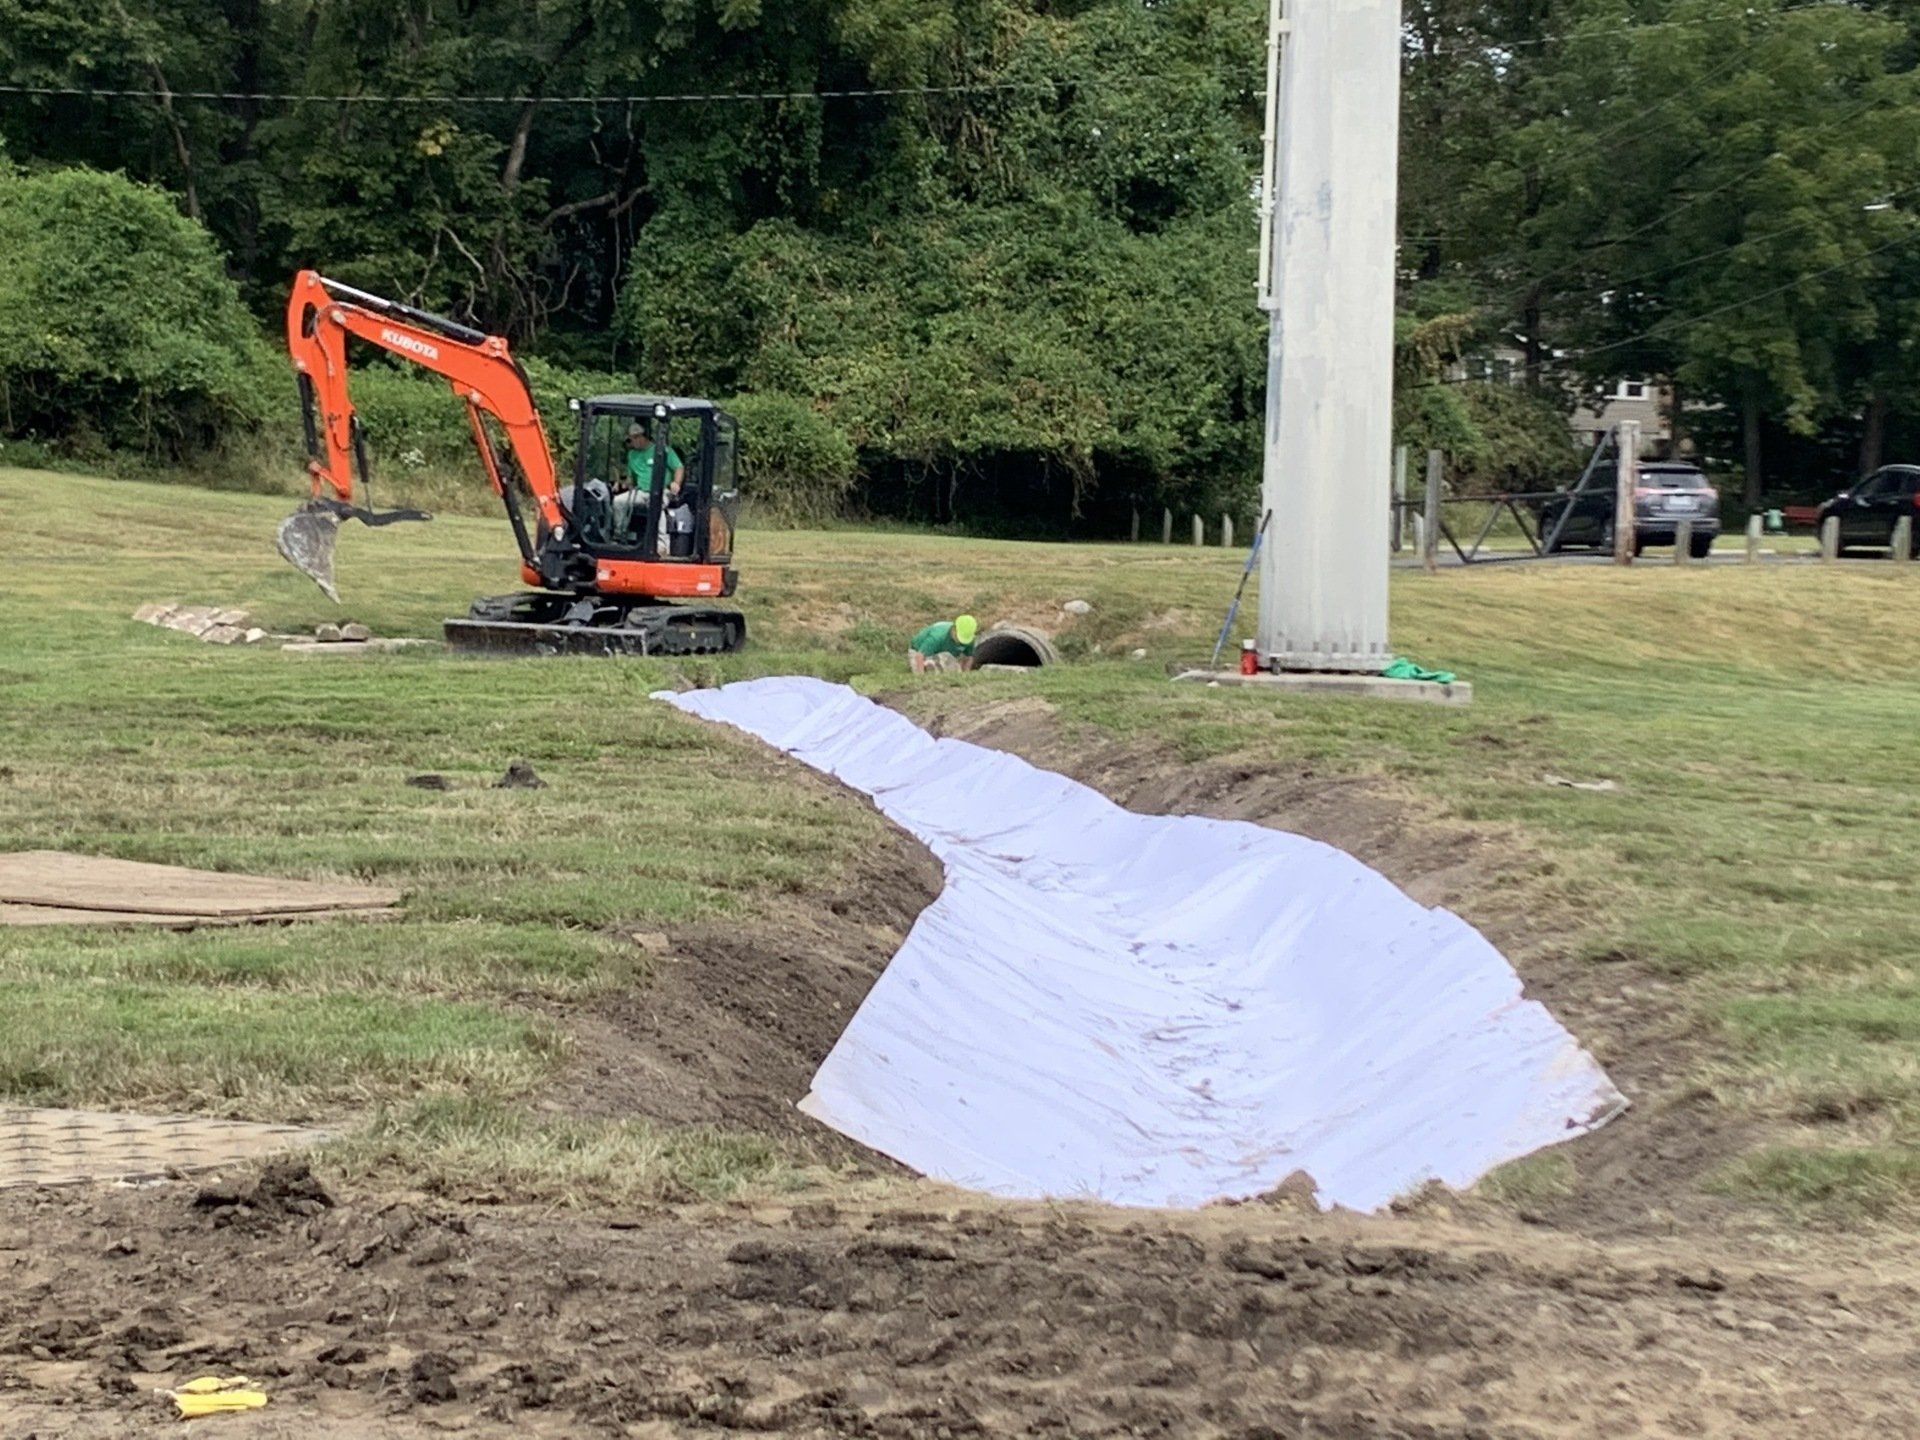 An excavator is digging a hole in the ground in a field.